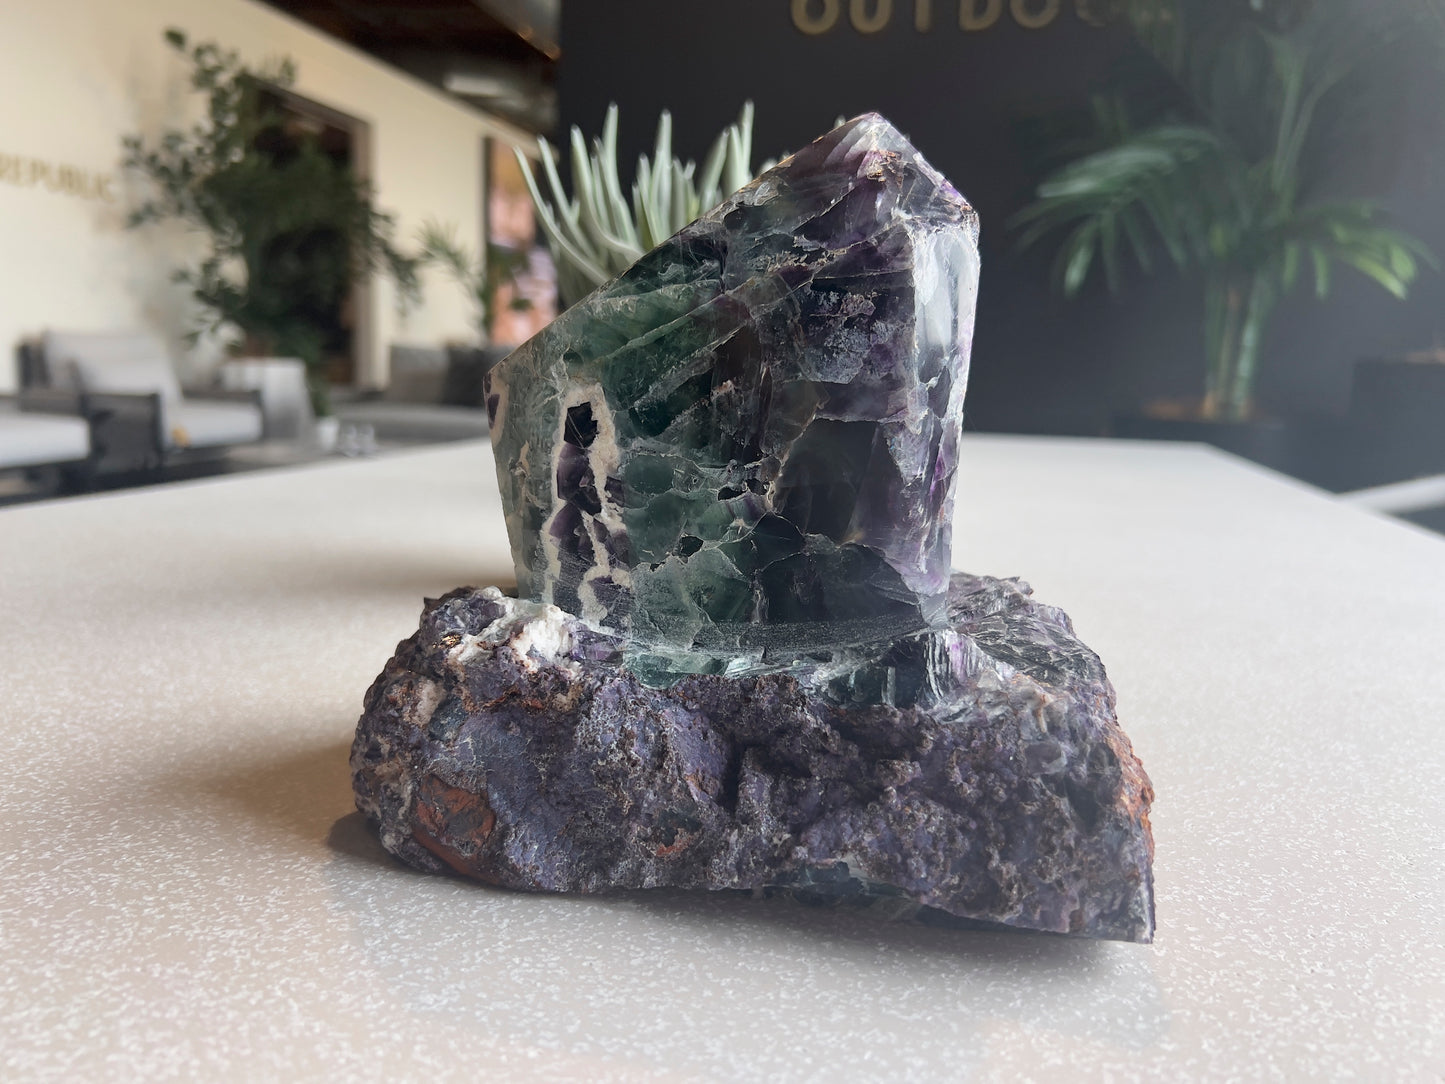 Fluorite Freeform Polished Point in natural Fluorite base